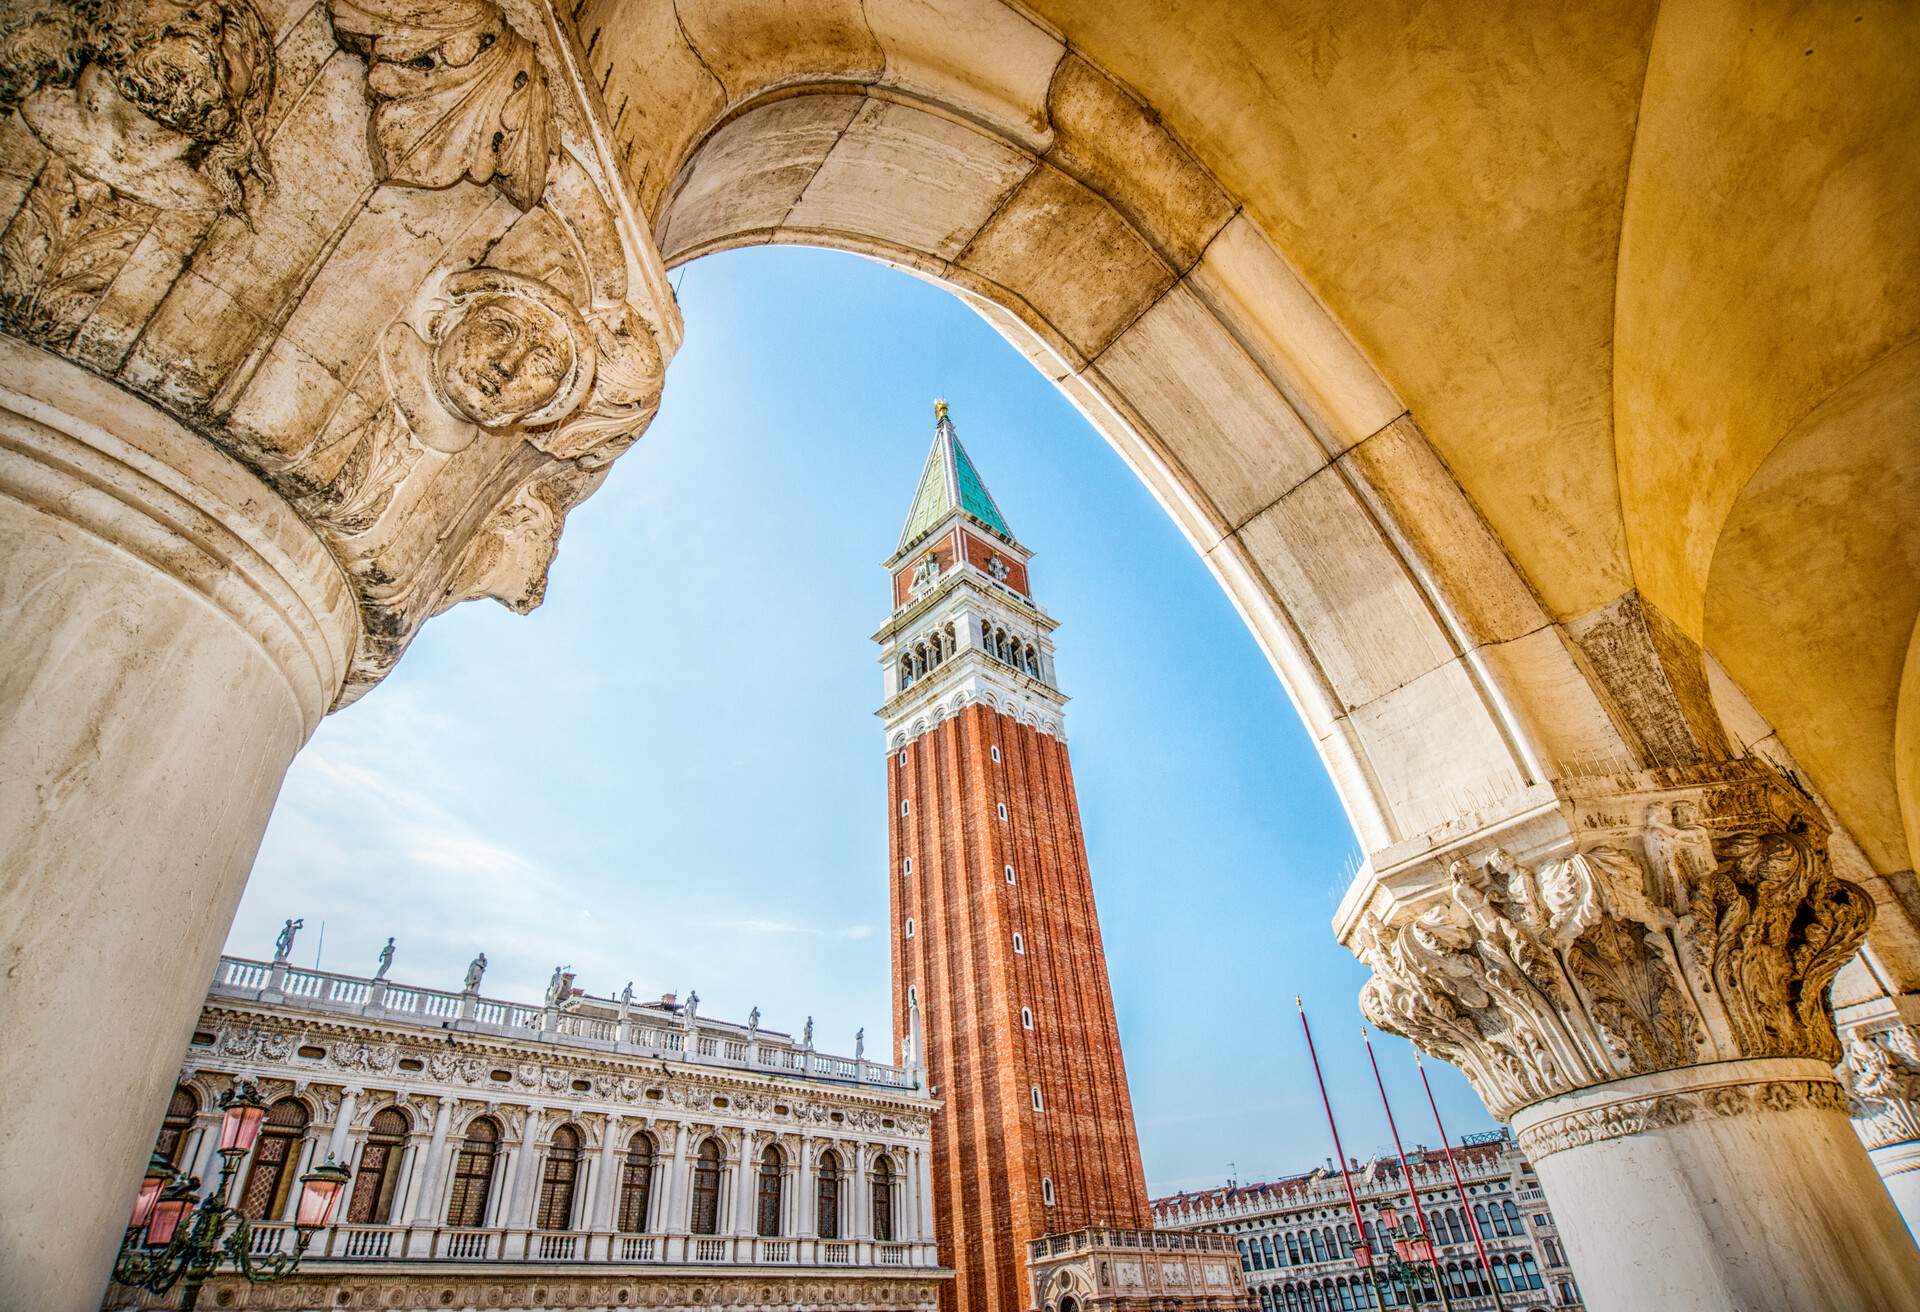 DEST_ITALY_VENICE_ST-MARK'S-SQUARE-CAMPANILE_MARKGettyImages-493377785